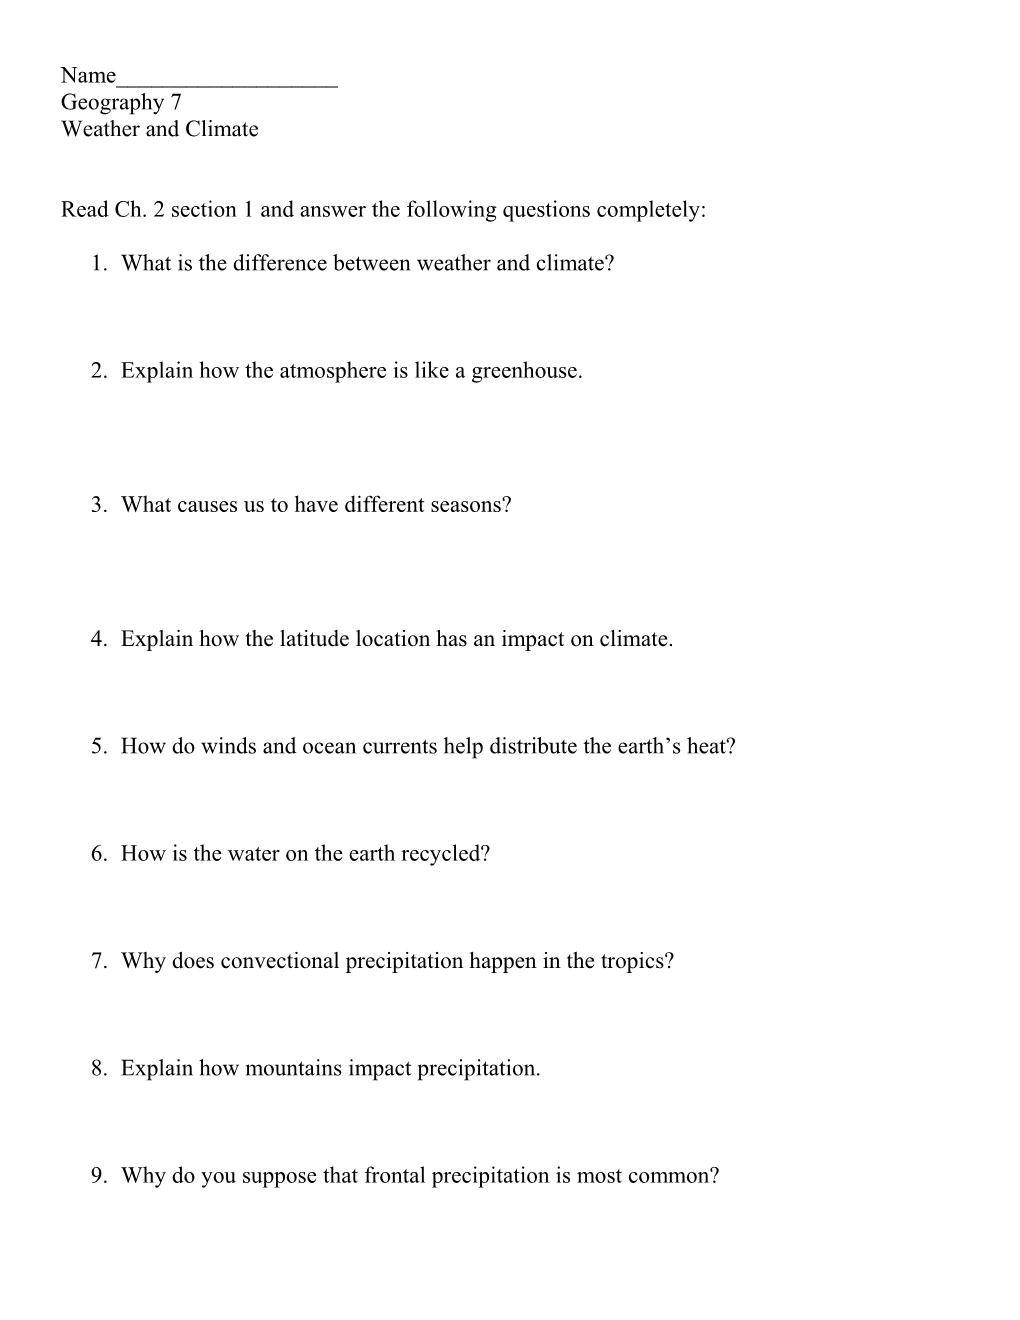 Read Ch. 2 Section 1 and Answer the Following Questions Completely